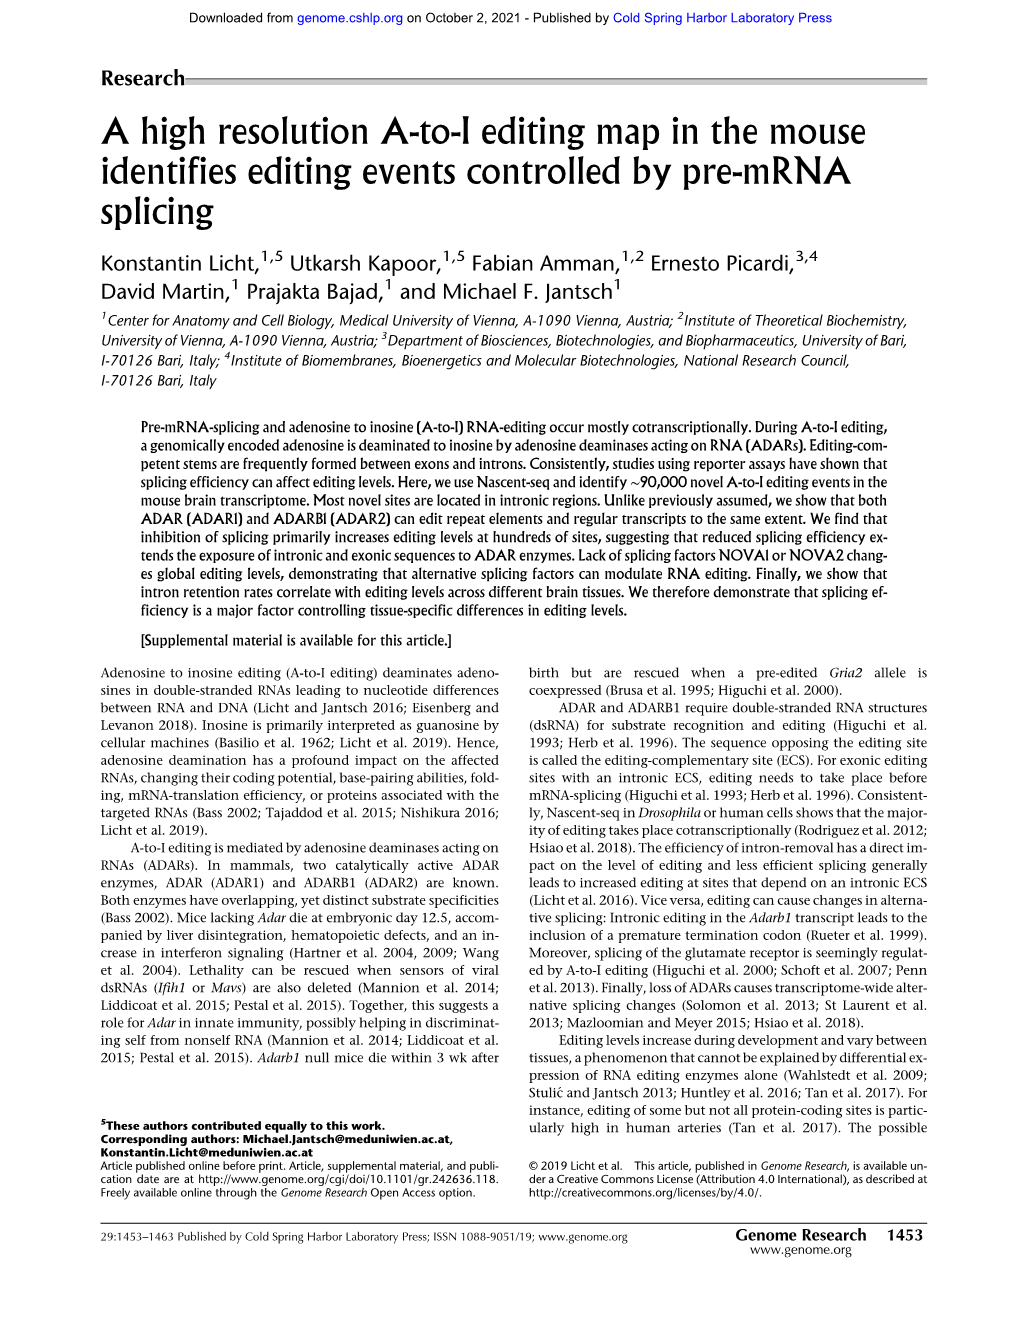 A High Resolution A-To-I Editing Map in the Mouse Identifies Editing Events Controlled by Pre-Mrna Splicing